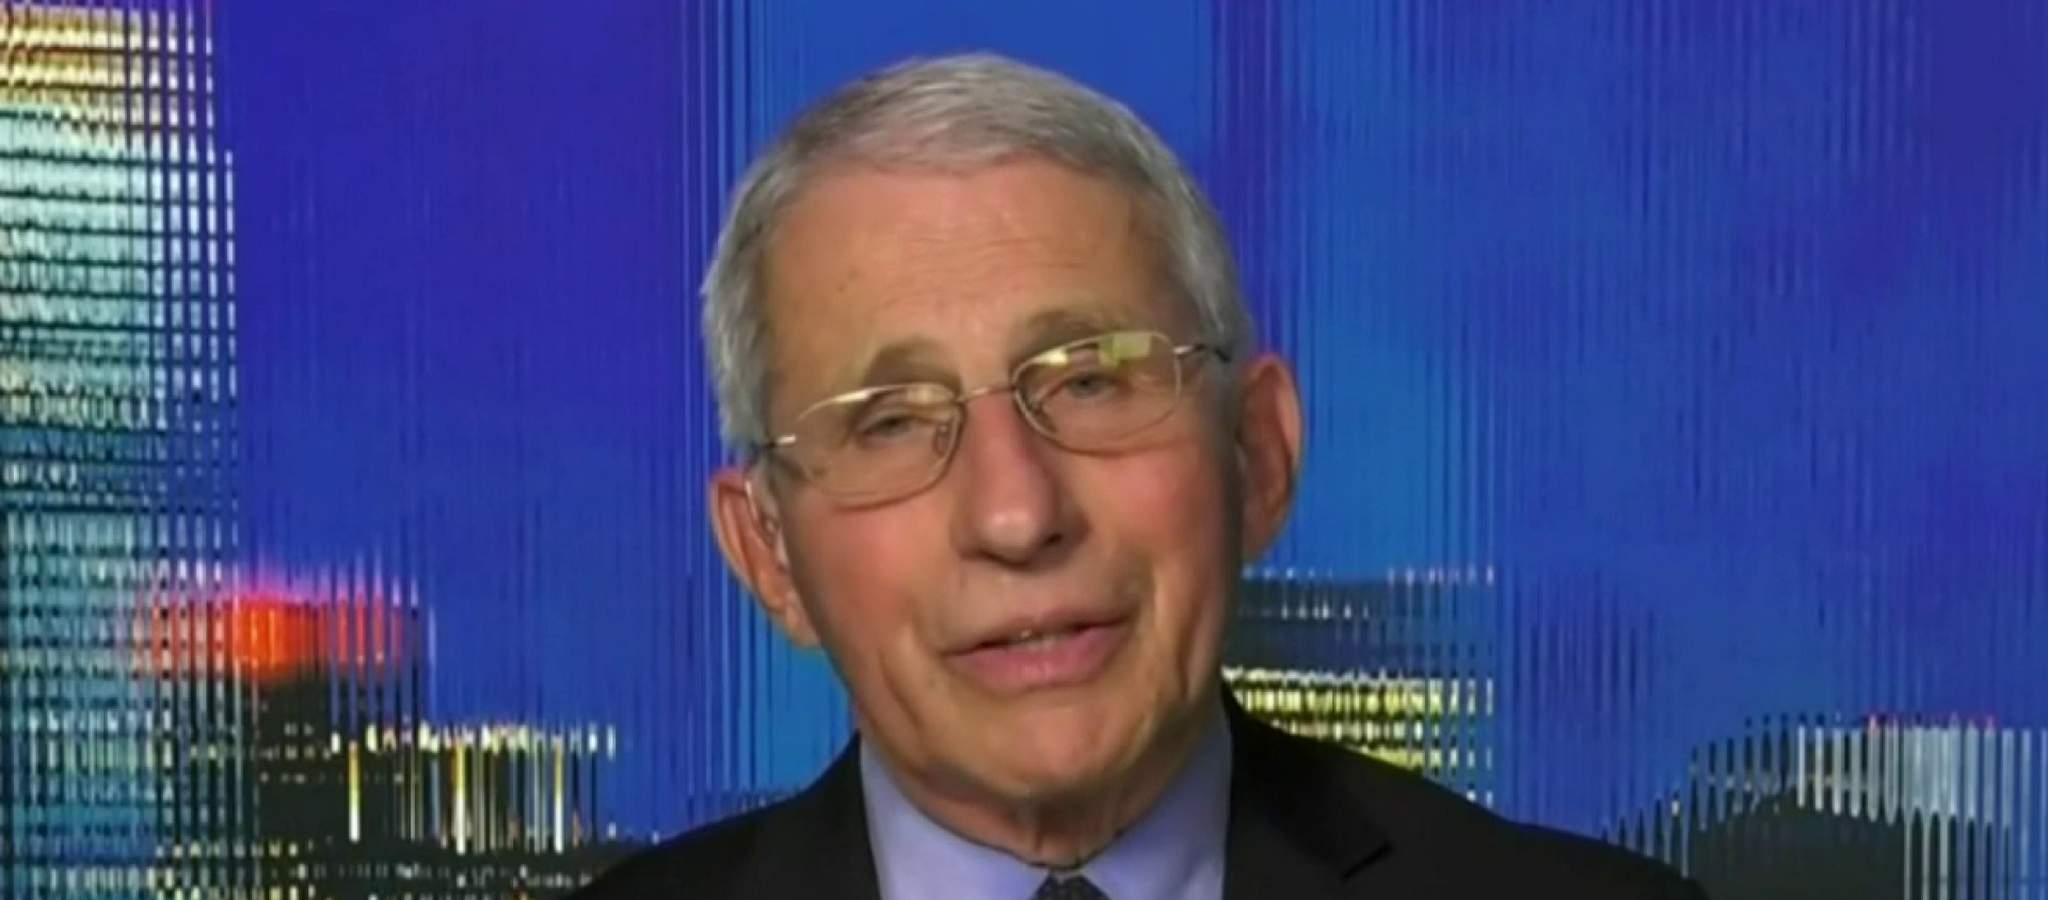 Dr. Anthony Fauci warns Gov. Whitmer about lifting COVID restrictions in Michigan